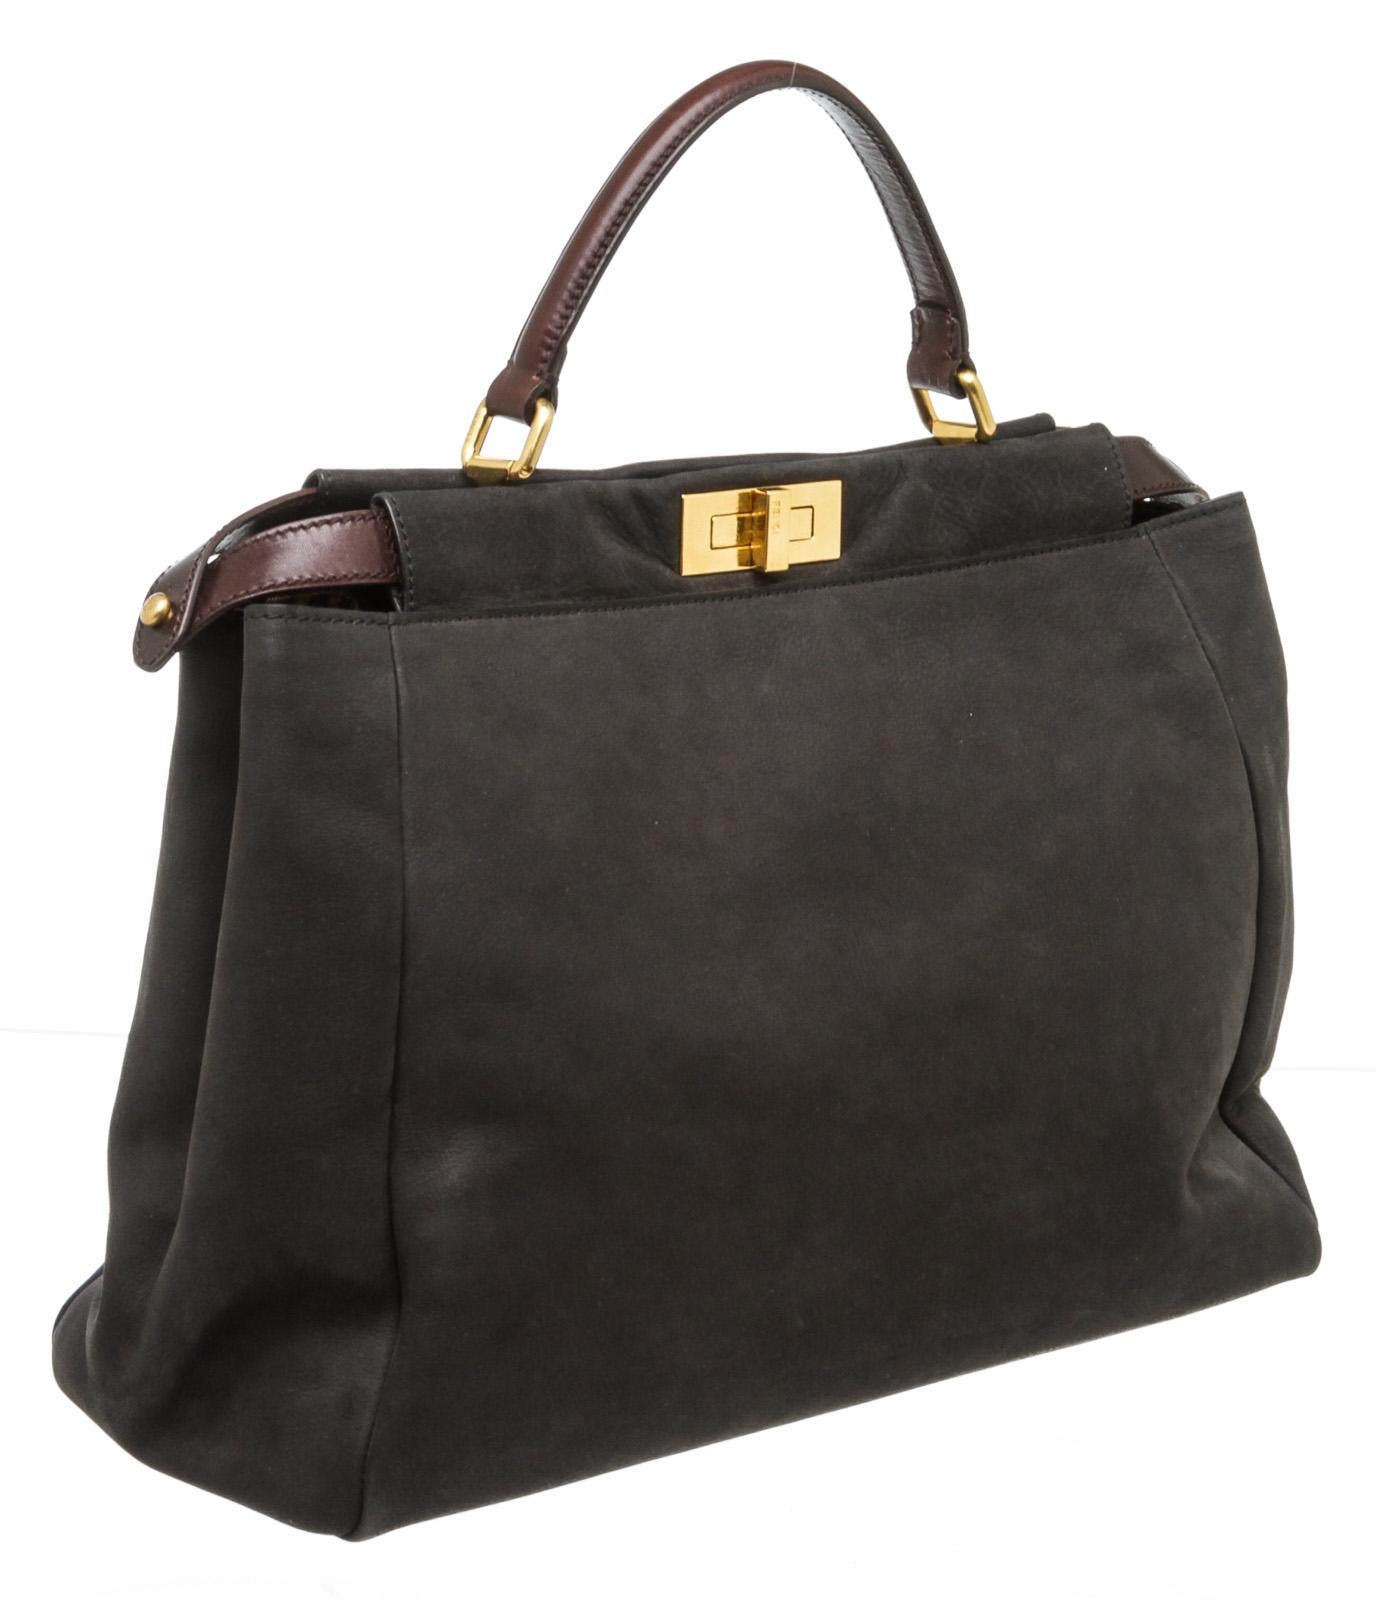 Fendi black nubuck Large Peekaboo satchel with gold-tone hardware, dual interior compartments with logo turn-lock closure, interior pocket with zip top, brown leather top handle.

16135MSC